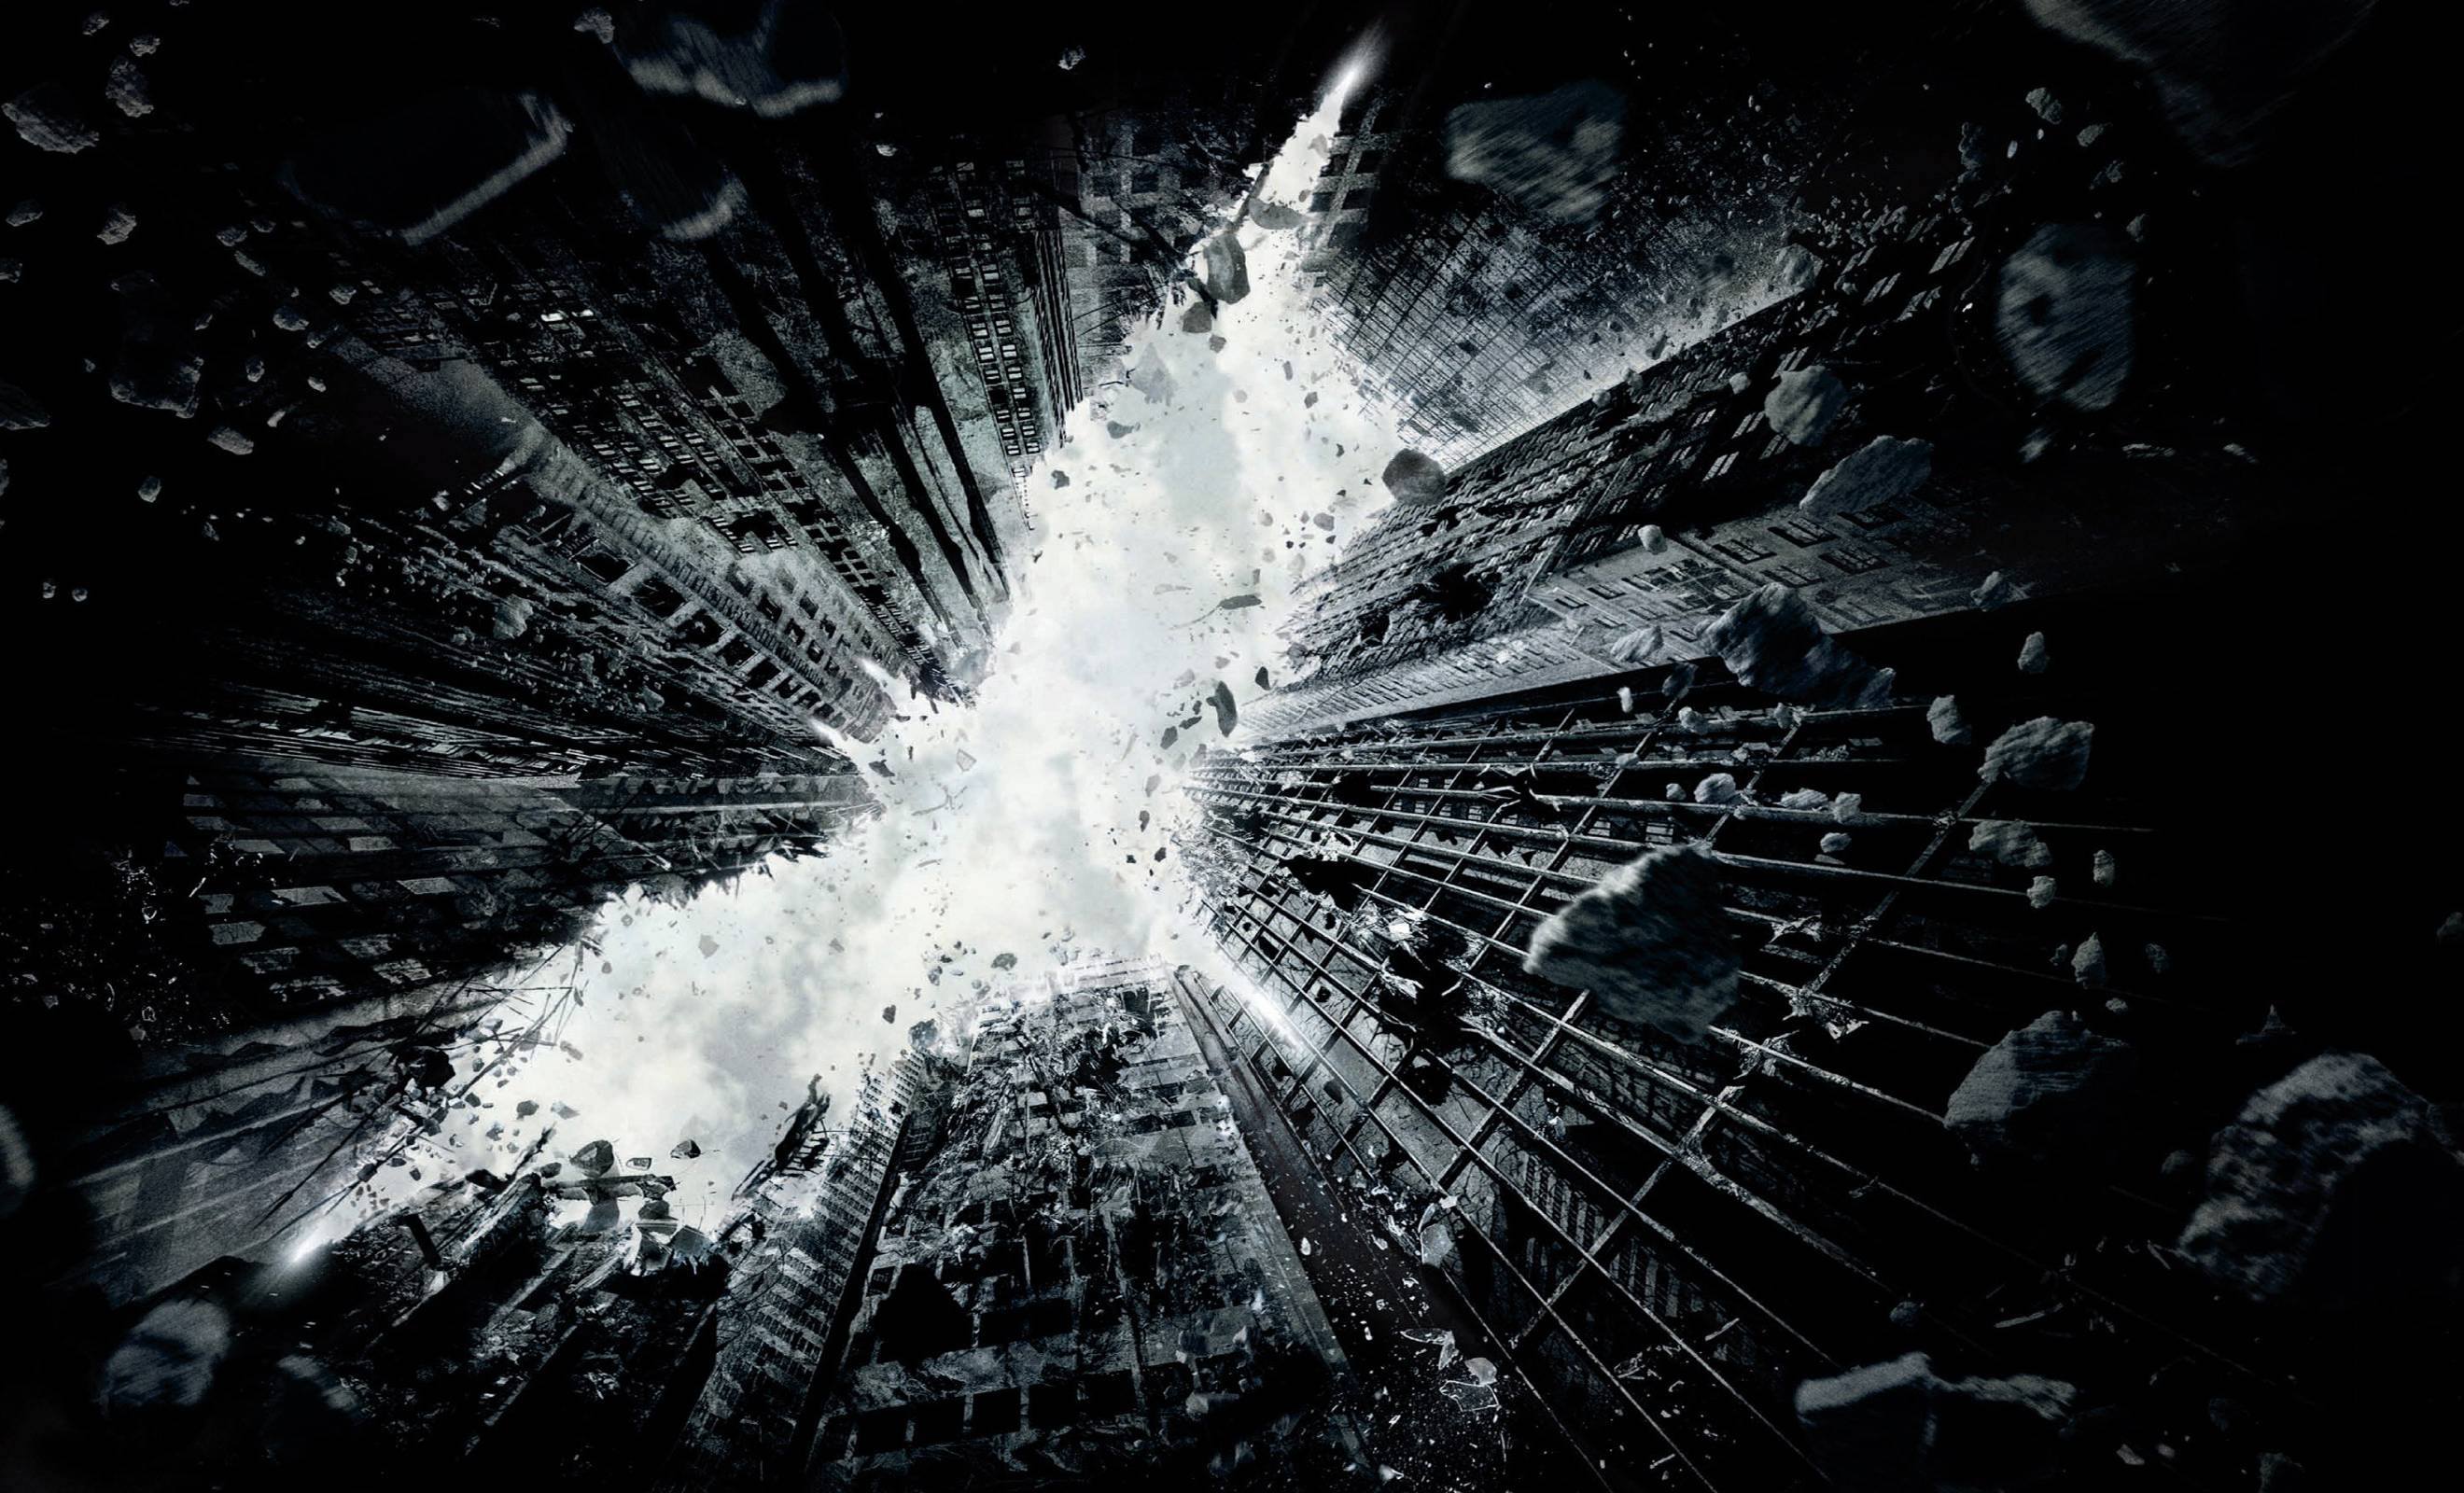 Wallpaper For > The Dark Knight Rises Wallpaper HD For iPhone